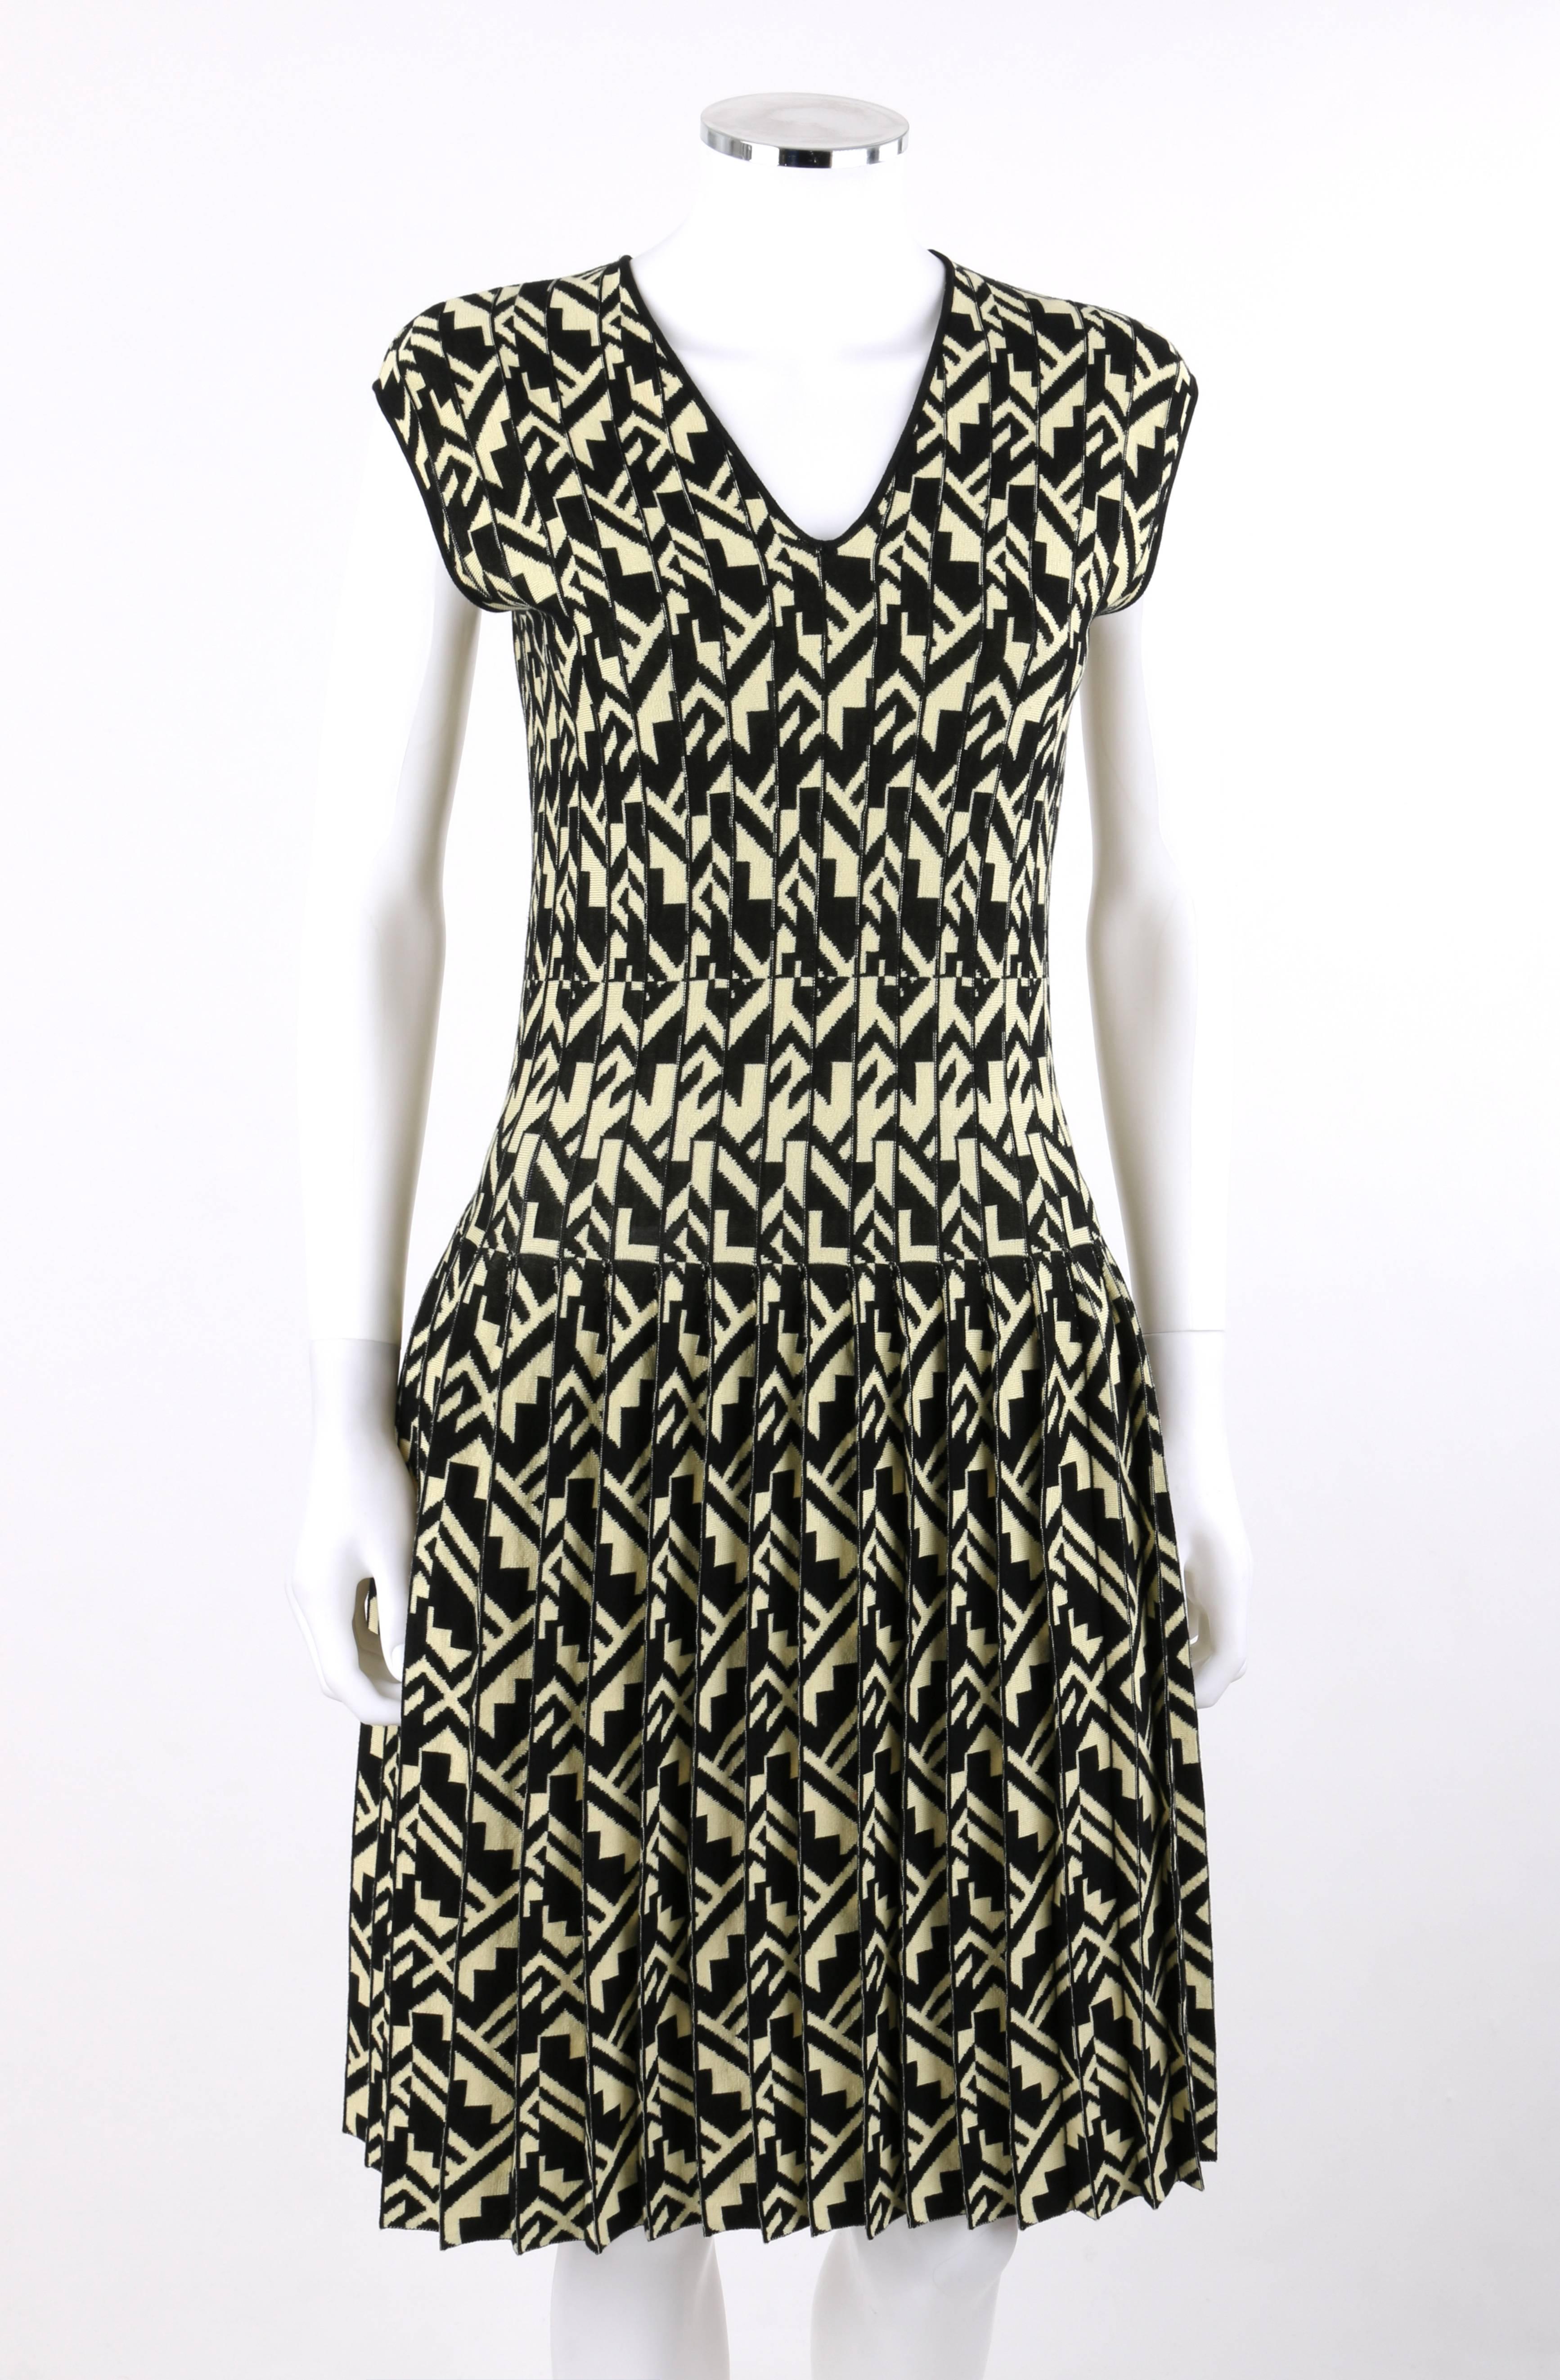 Etro Milano black and soft yellow geometric print knit drop waist pleated cocktail dress; new with tags. V neckline. Sleeveless. Drop waist. Knife pleated skirt. Slip-on style. Thin black rib knit detail at neckline and arm holes. Unlined. MSRP